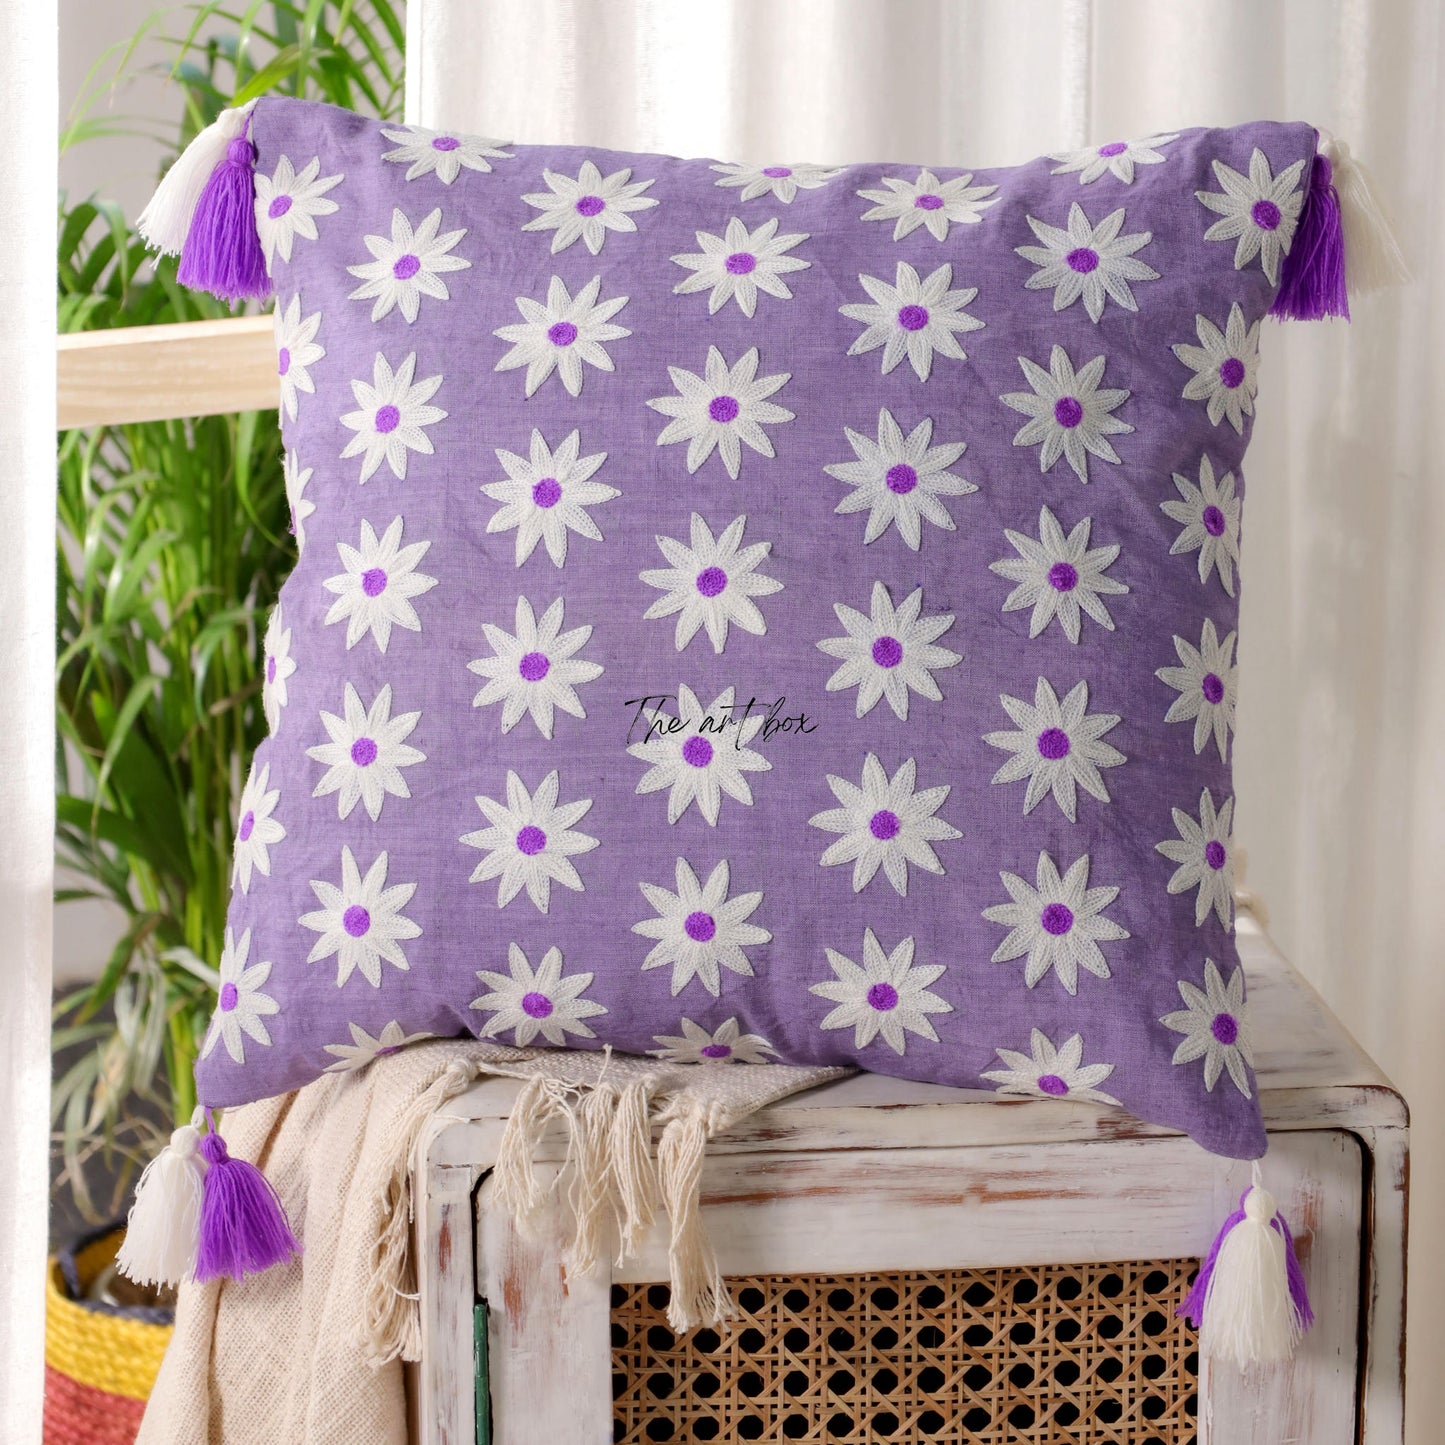 Embroidered Floral Accent Pillow - Bring the Garden Indoors